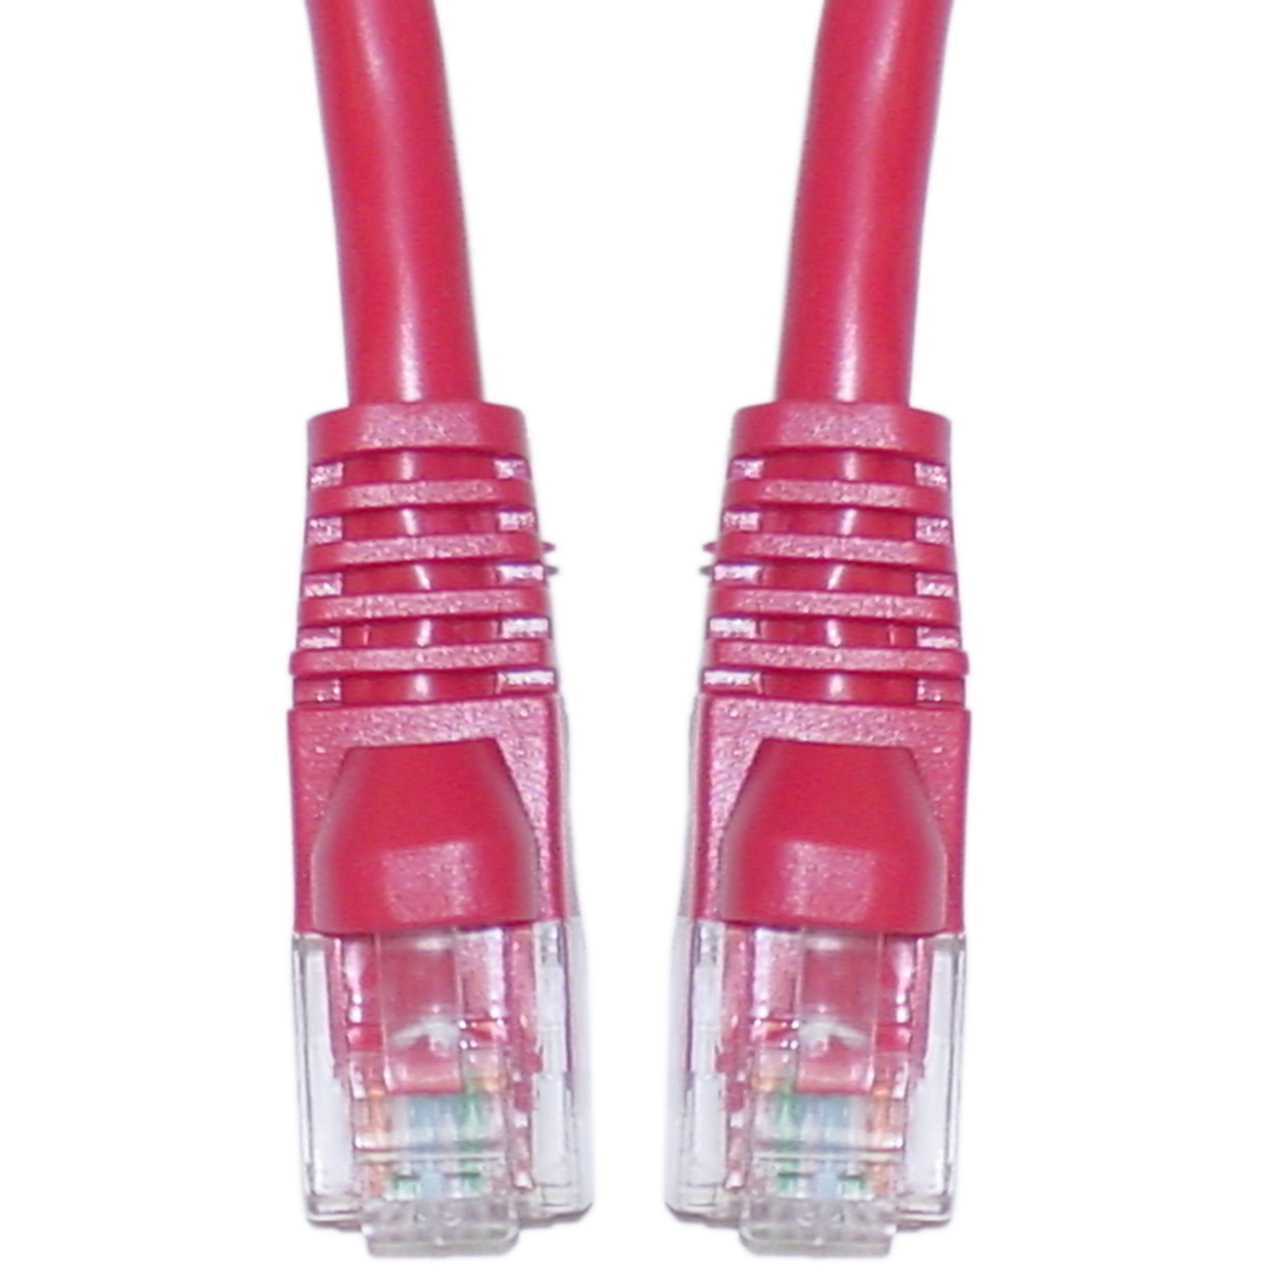 UTP 50 Feet - Red RJ45 10Gbps High Speed LAN Internet Cord Cat5e Crossover Ethernet Cable GOWOS 10-Pack Available in 28 Lengths and 10 Colors Computer Network Cable with Snagless Connector